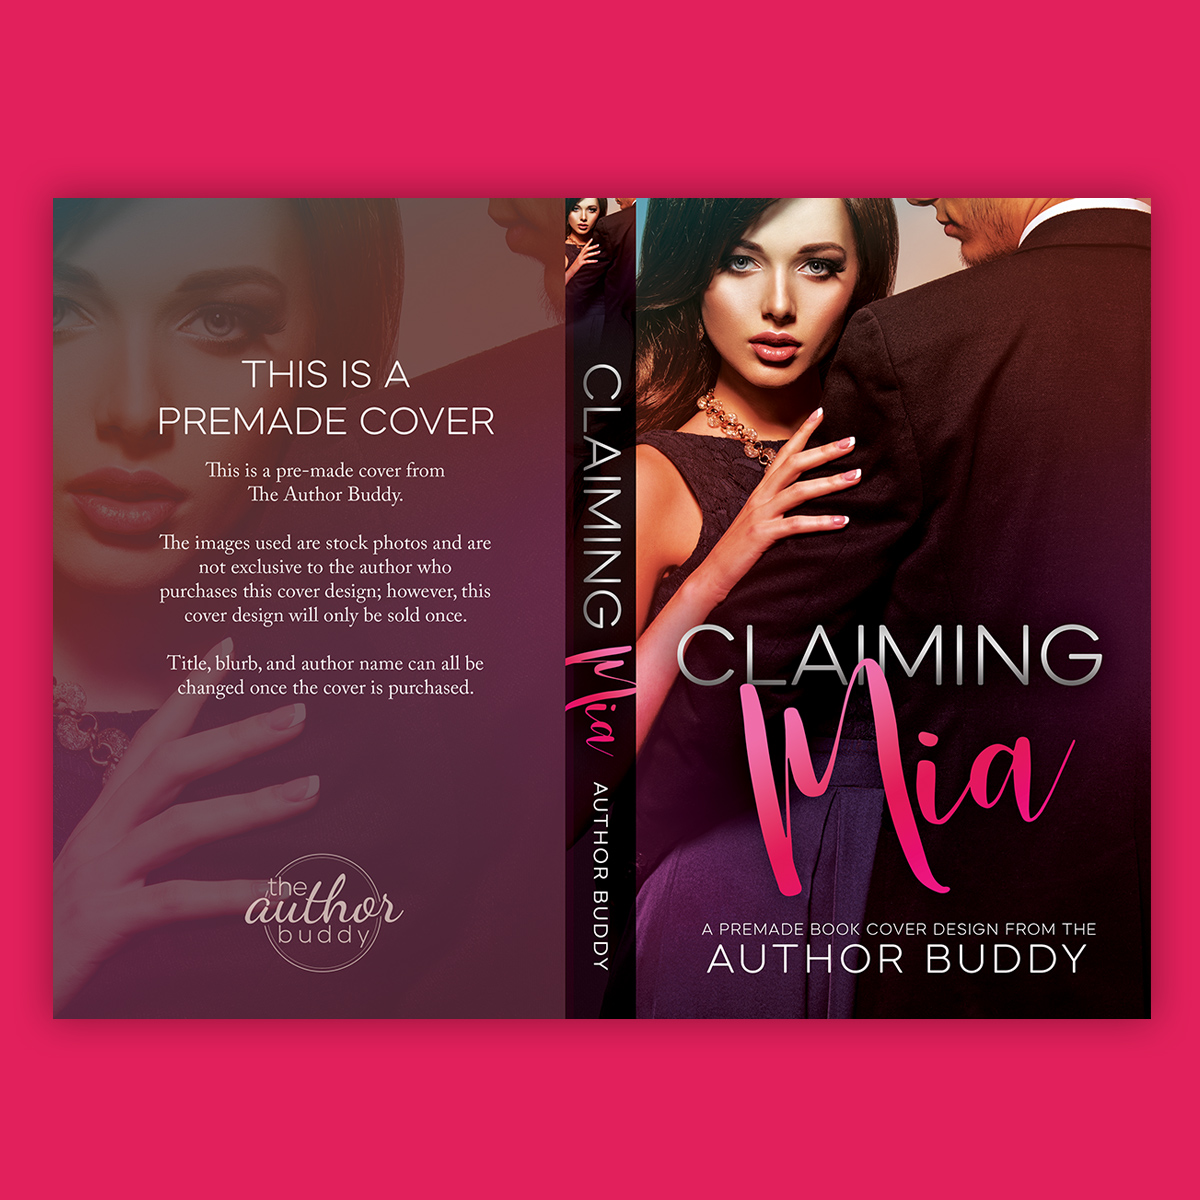 Claiming Mia - Premade Book Cover from The Author Buddy